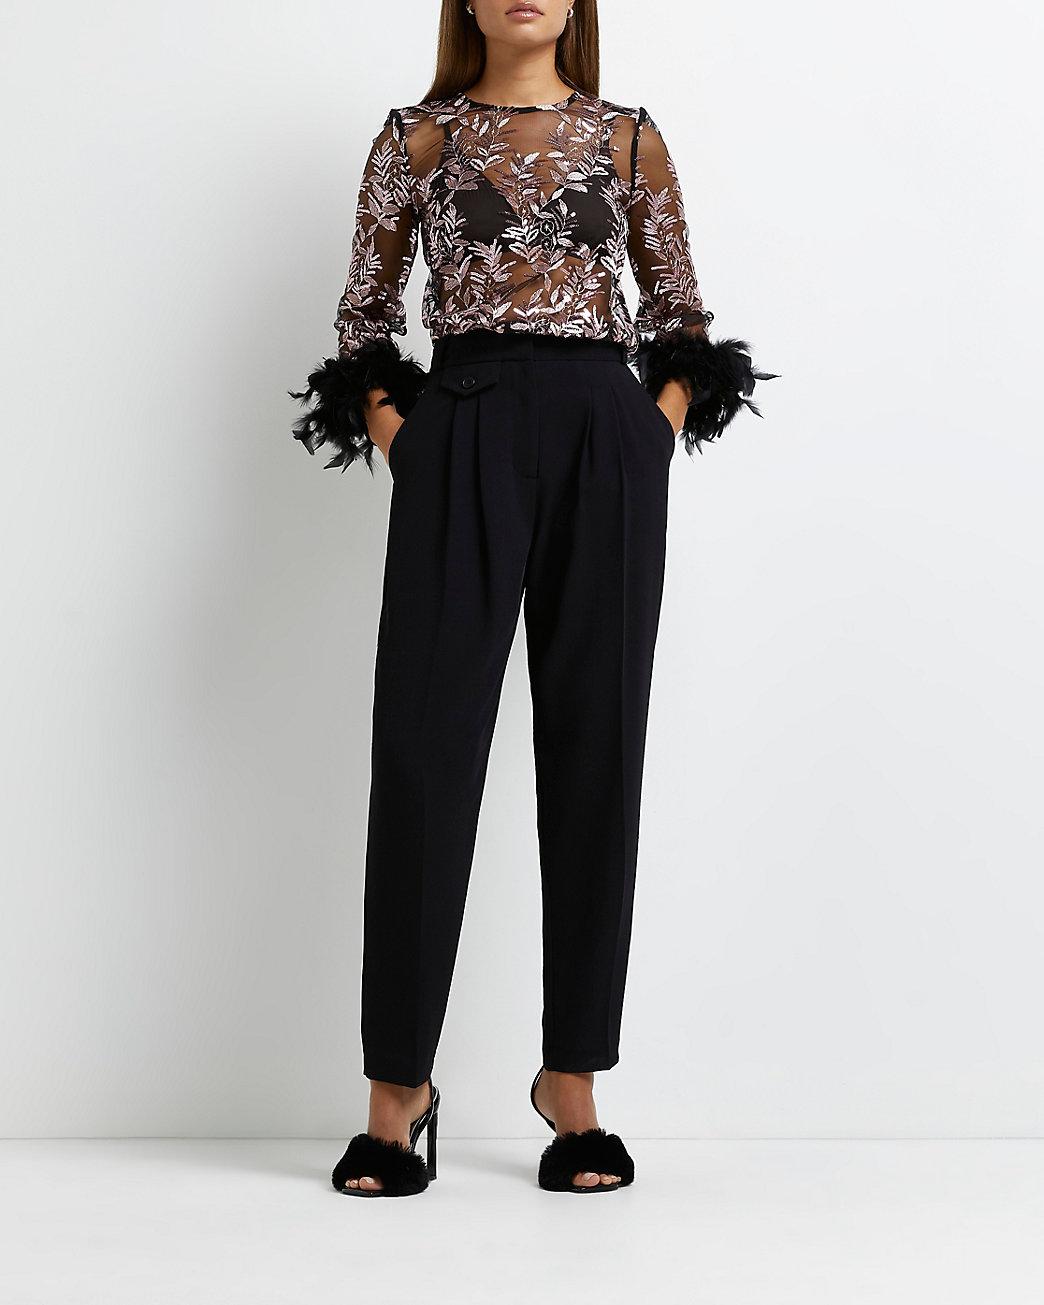 River Island Black Feather Cuff Sequin Sheer Top | Lyst